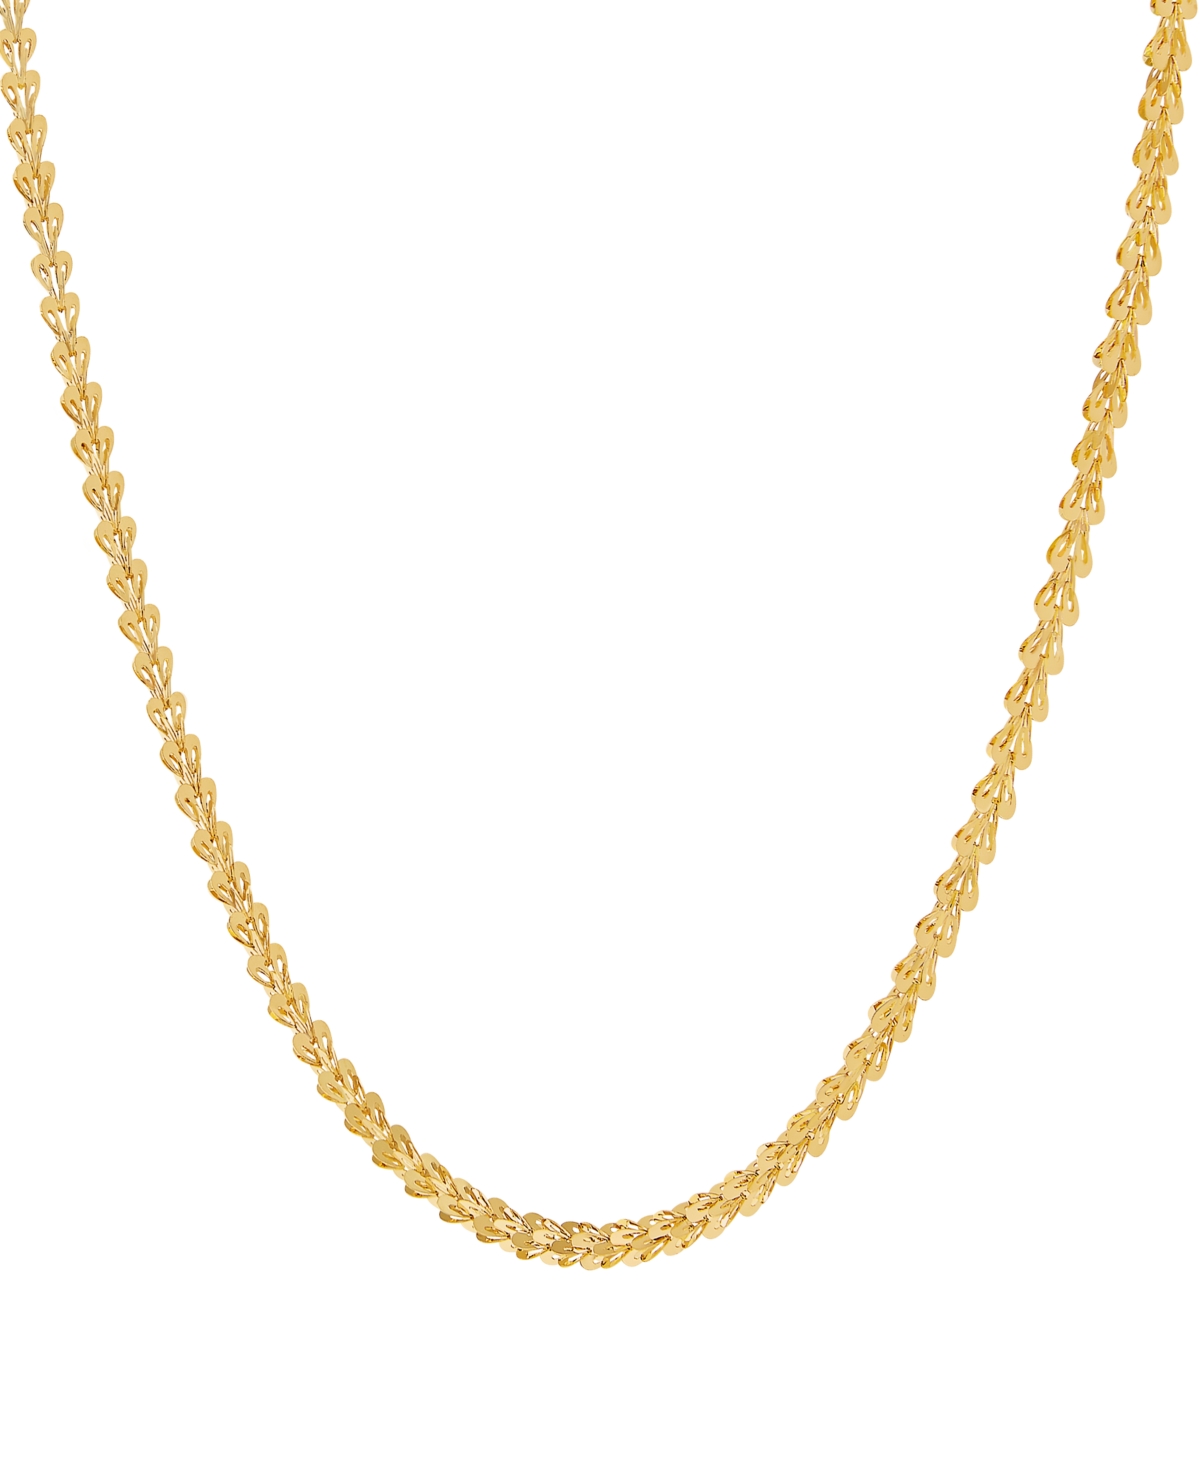 Polished Foldover Heart Link 18" Chain Necklace in 14k Gold - Gold